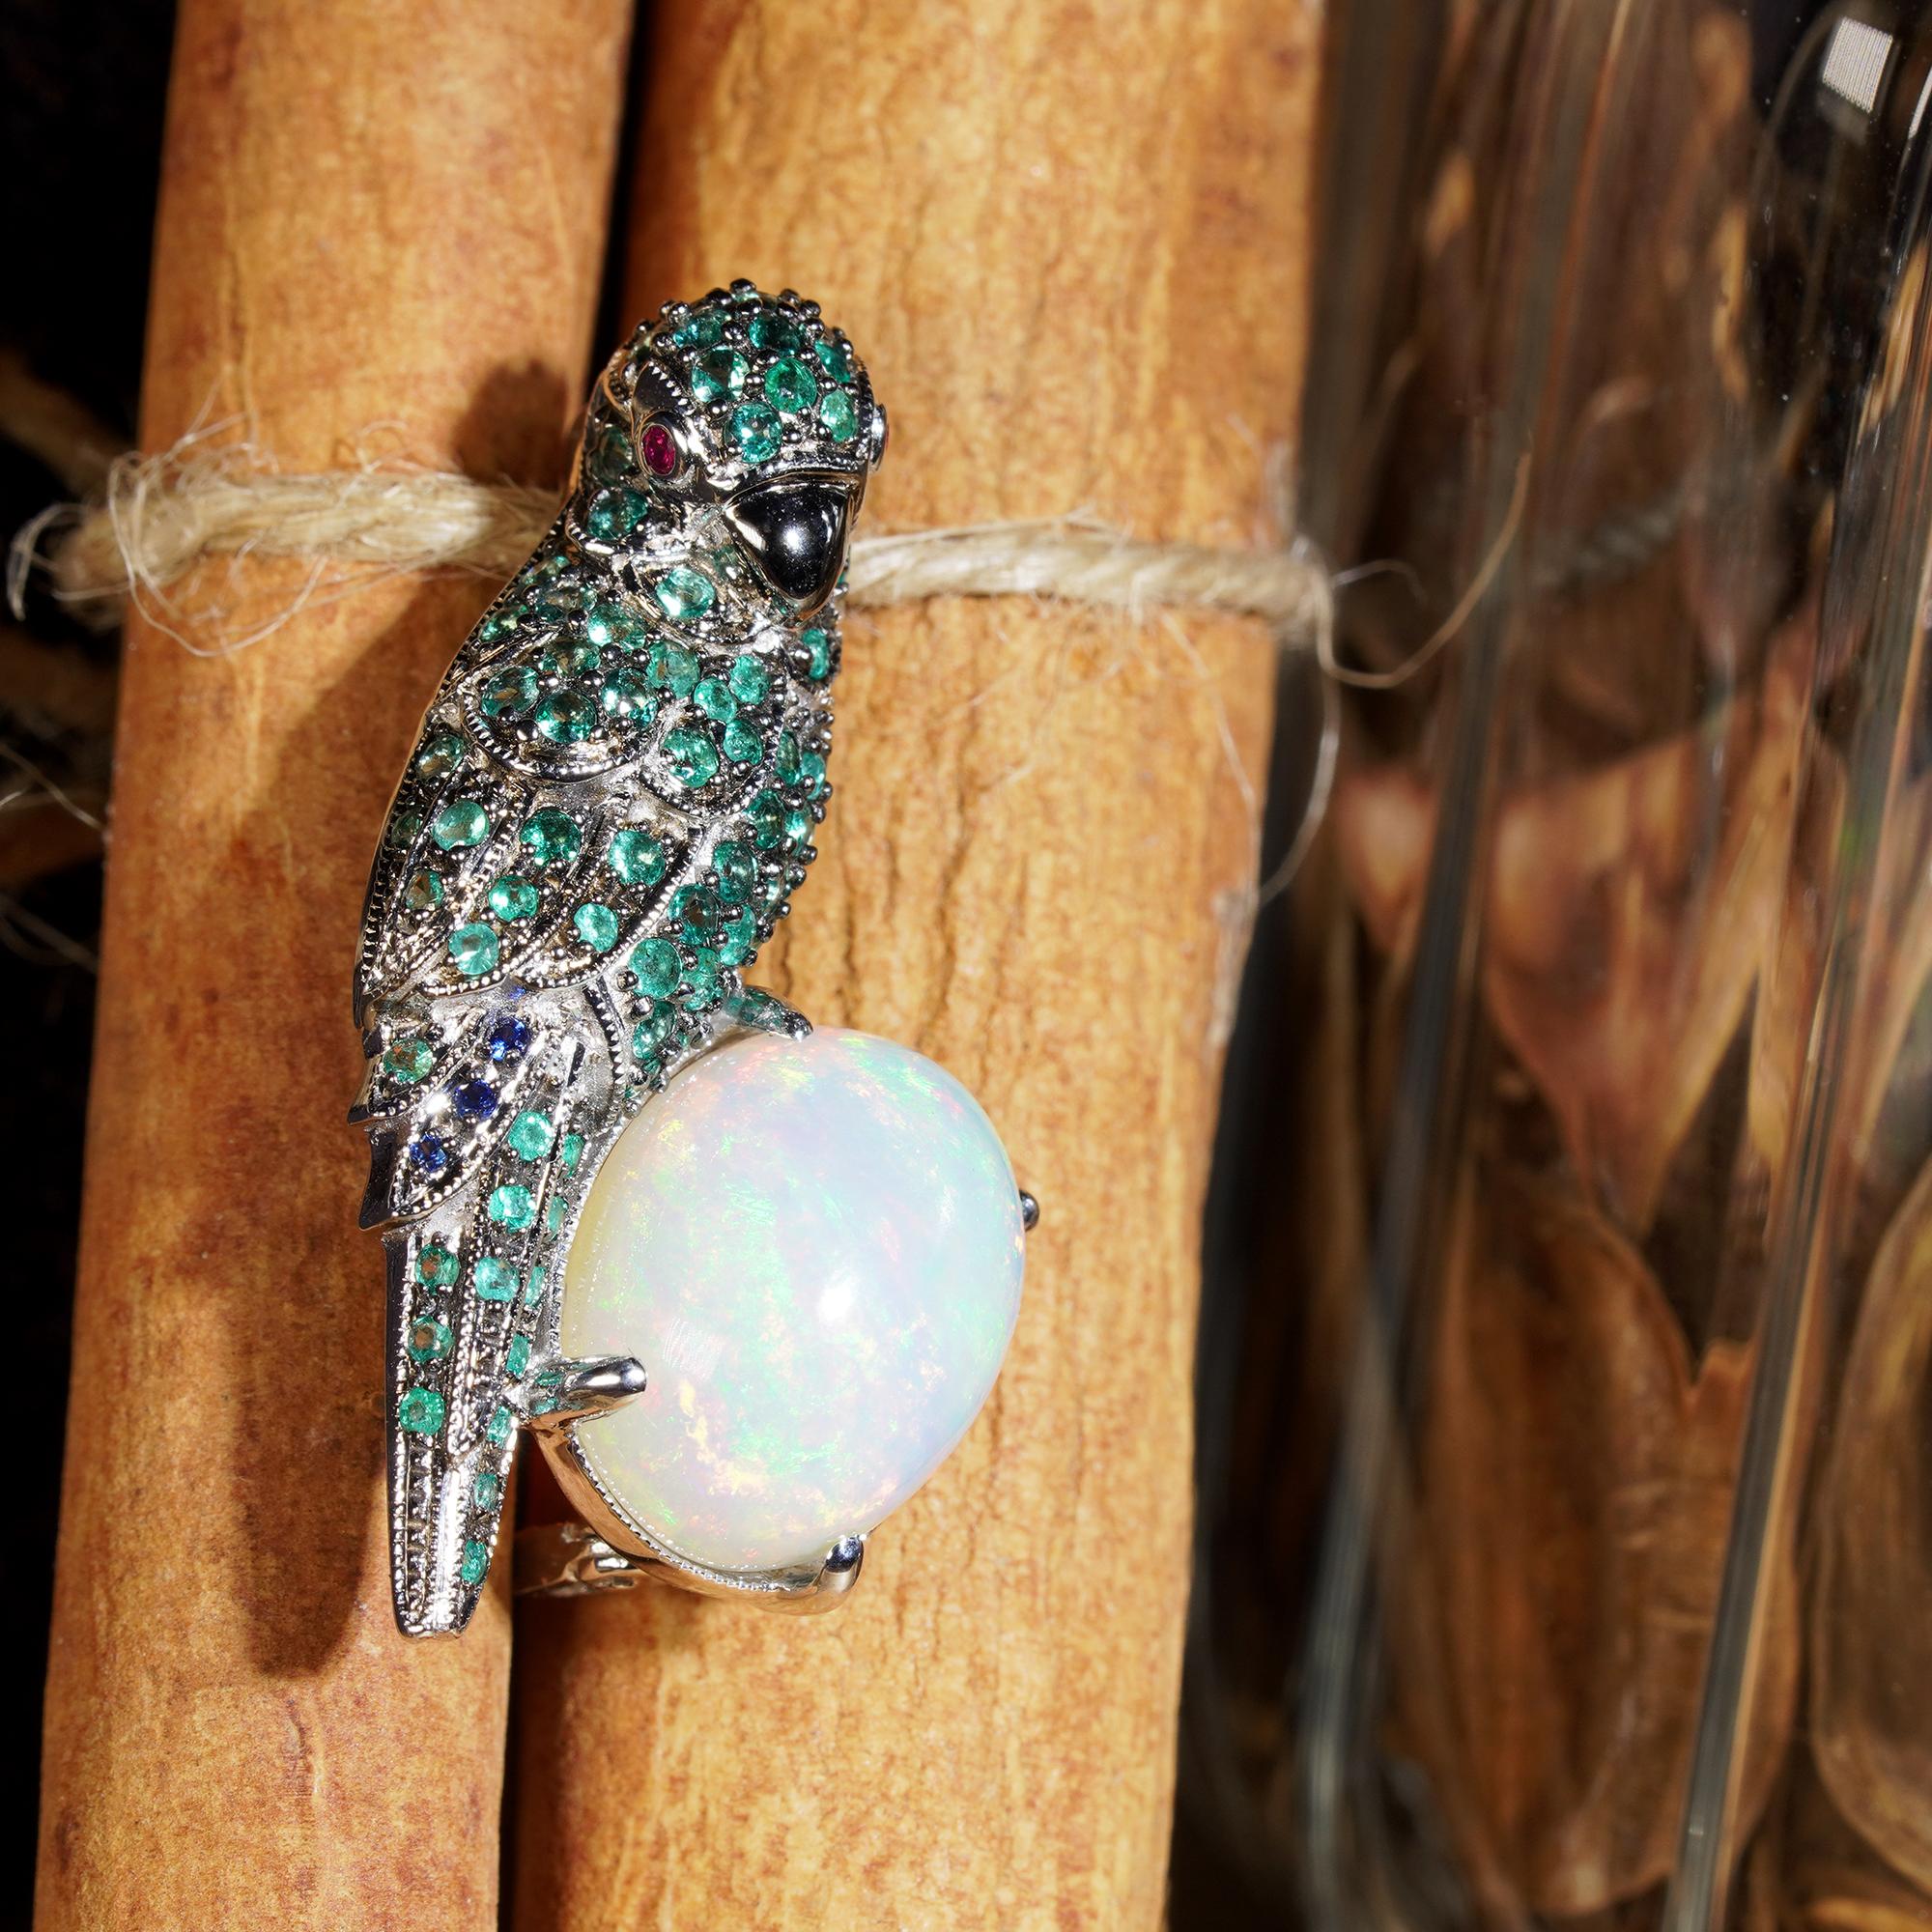 Delightfully chic and exquisitely detailed, this brooch features an artfully stylized depiction of one of nature’s creation. The body and tail of the parrot features emeralds and sapphires set its trailing feathers, rubies on its eyes. It’s perching